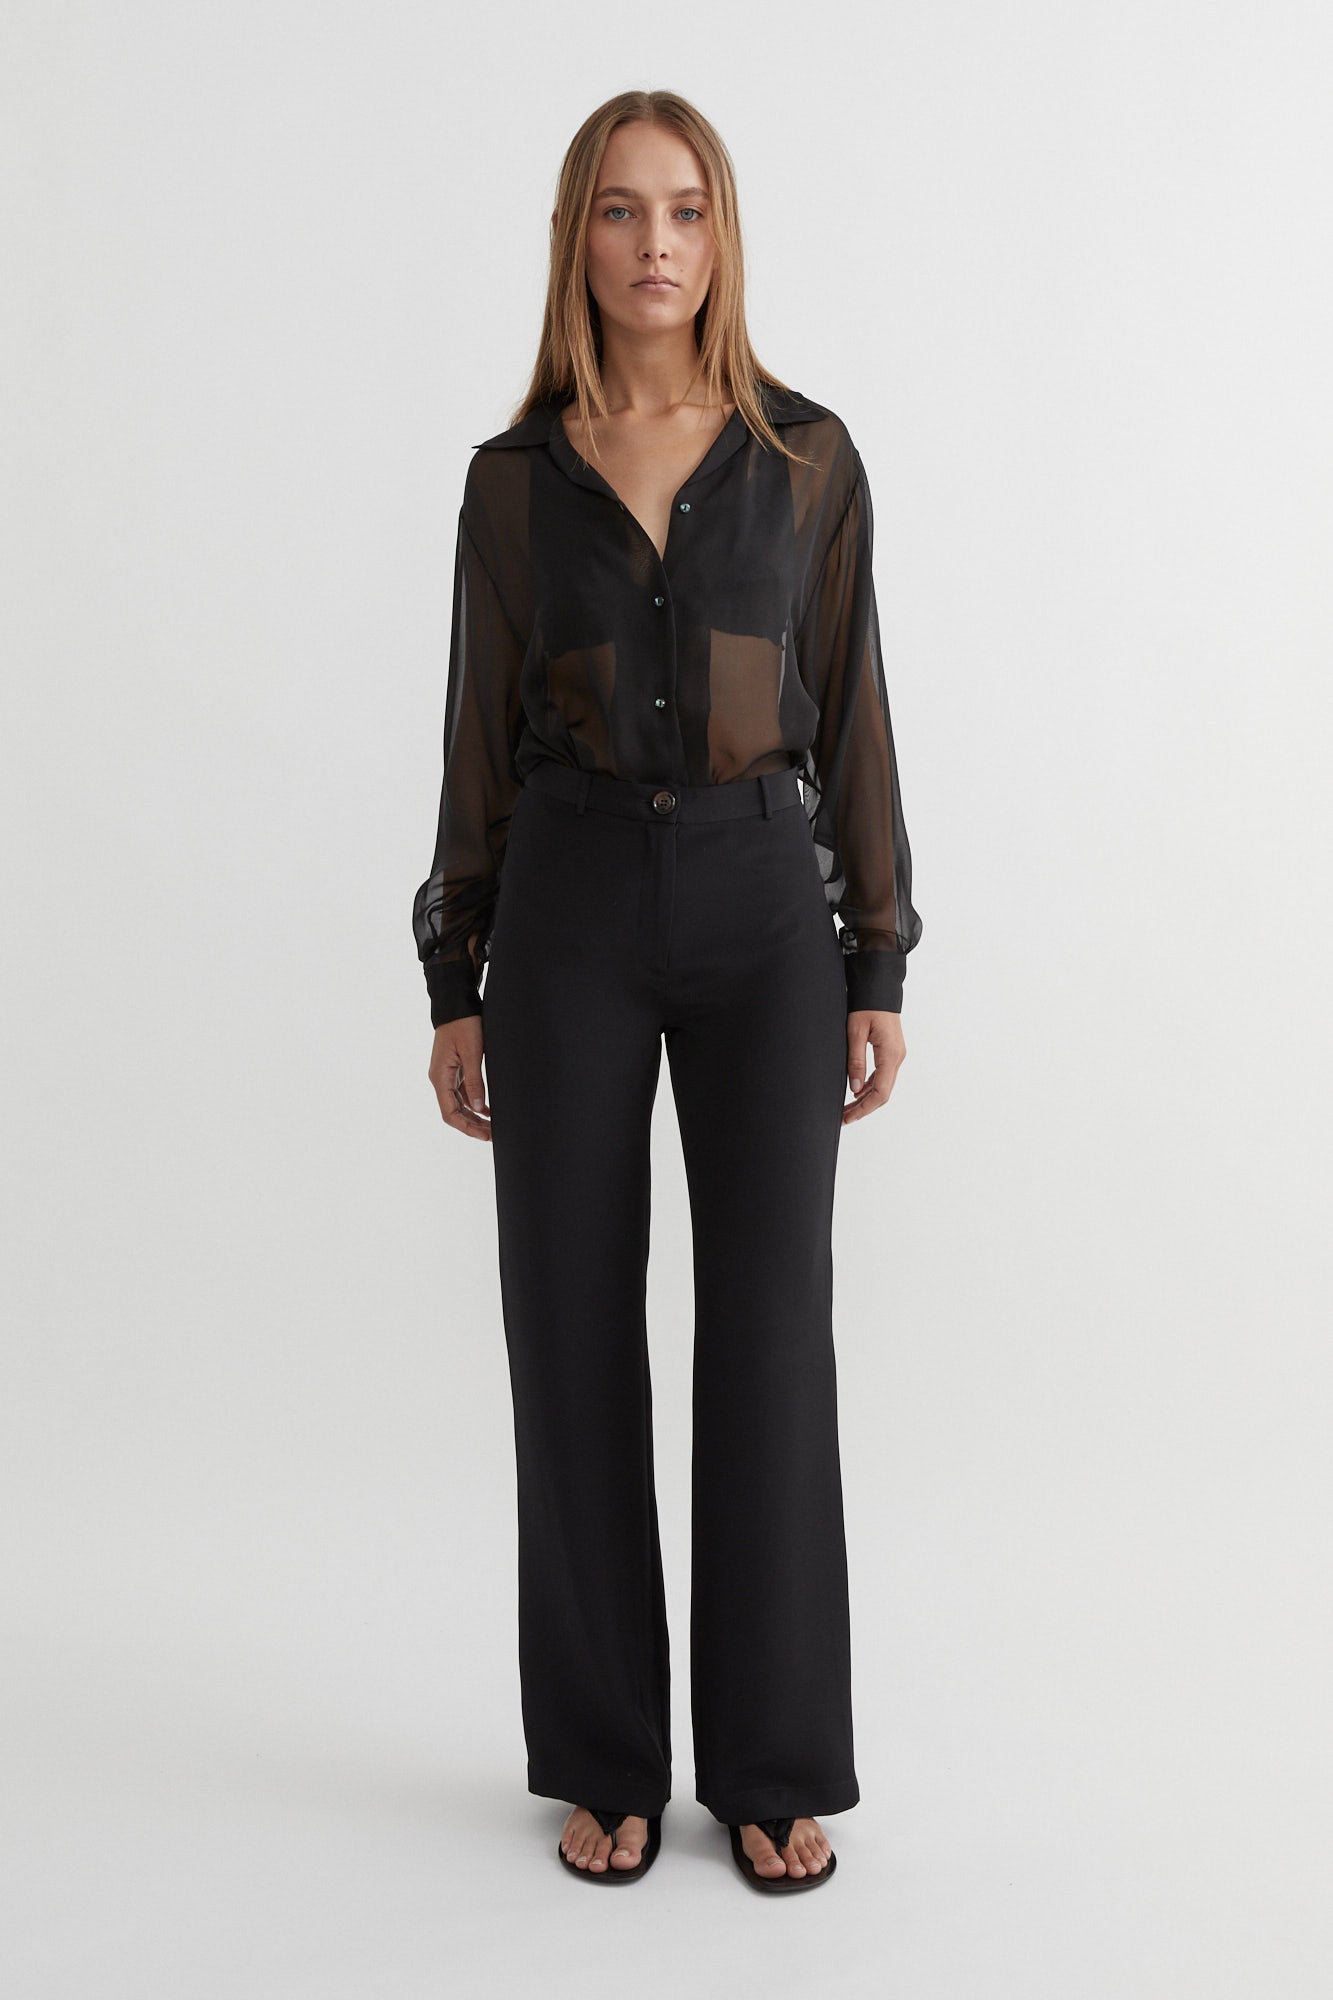 SAINT Lookbook Black Silk Pants, the perfect dressy going out pant. Made in Australia